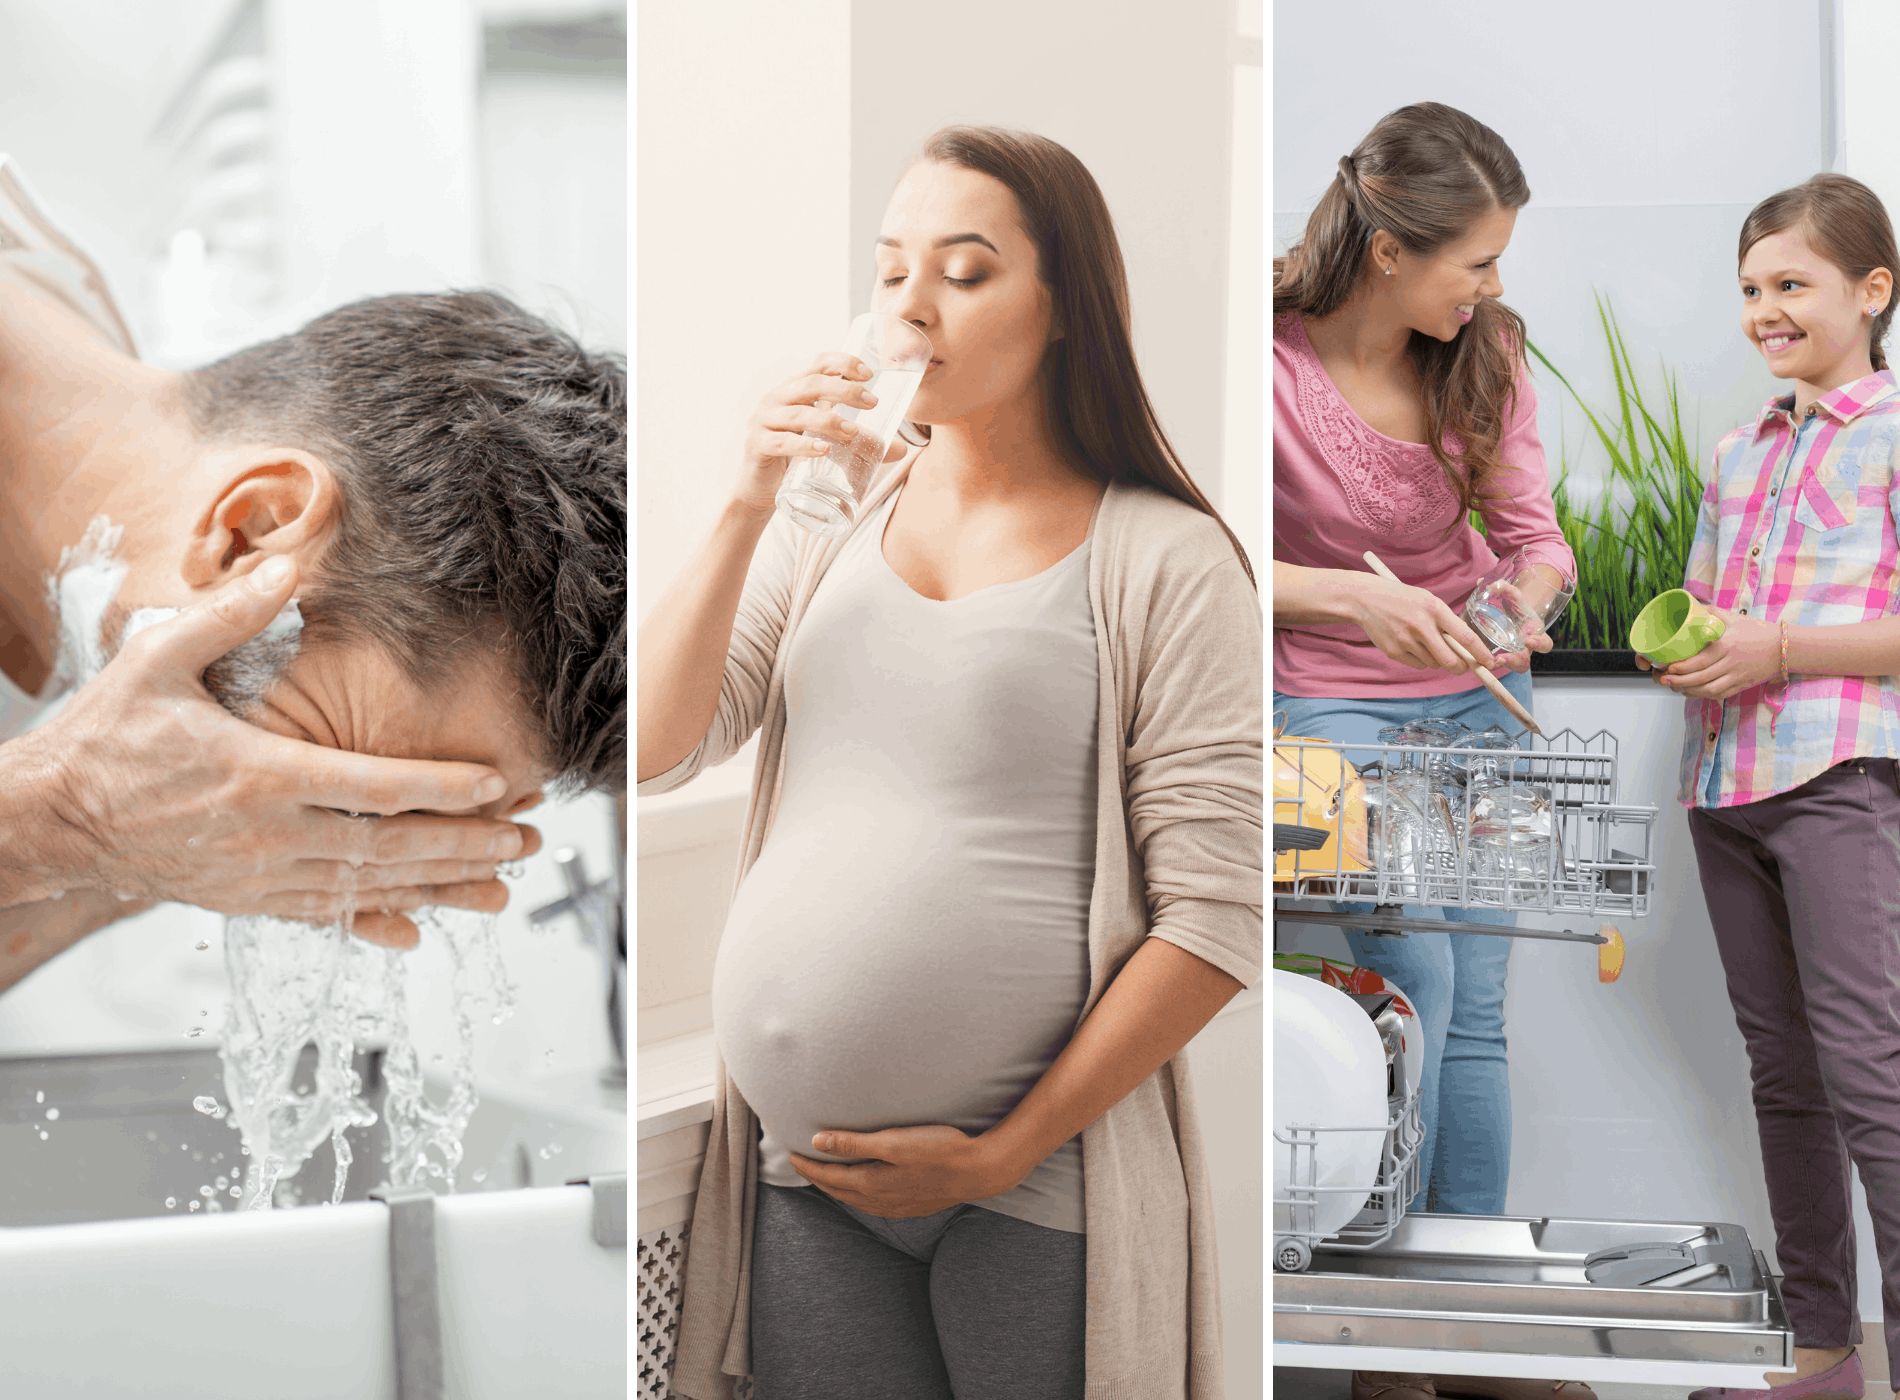 Man Washing Face With Filtered Water | Pregnant Woman Drinking Filtered Water | Woman Washing Dishes With Filtered Water